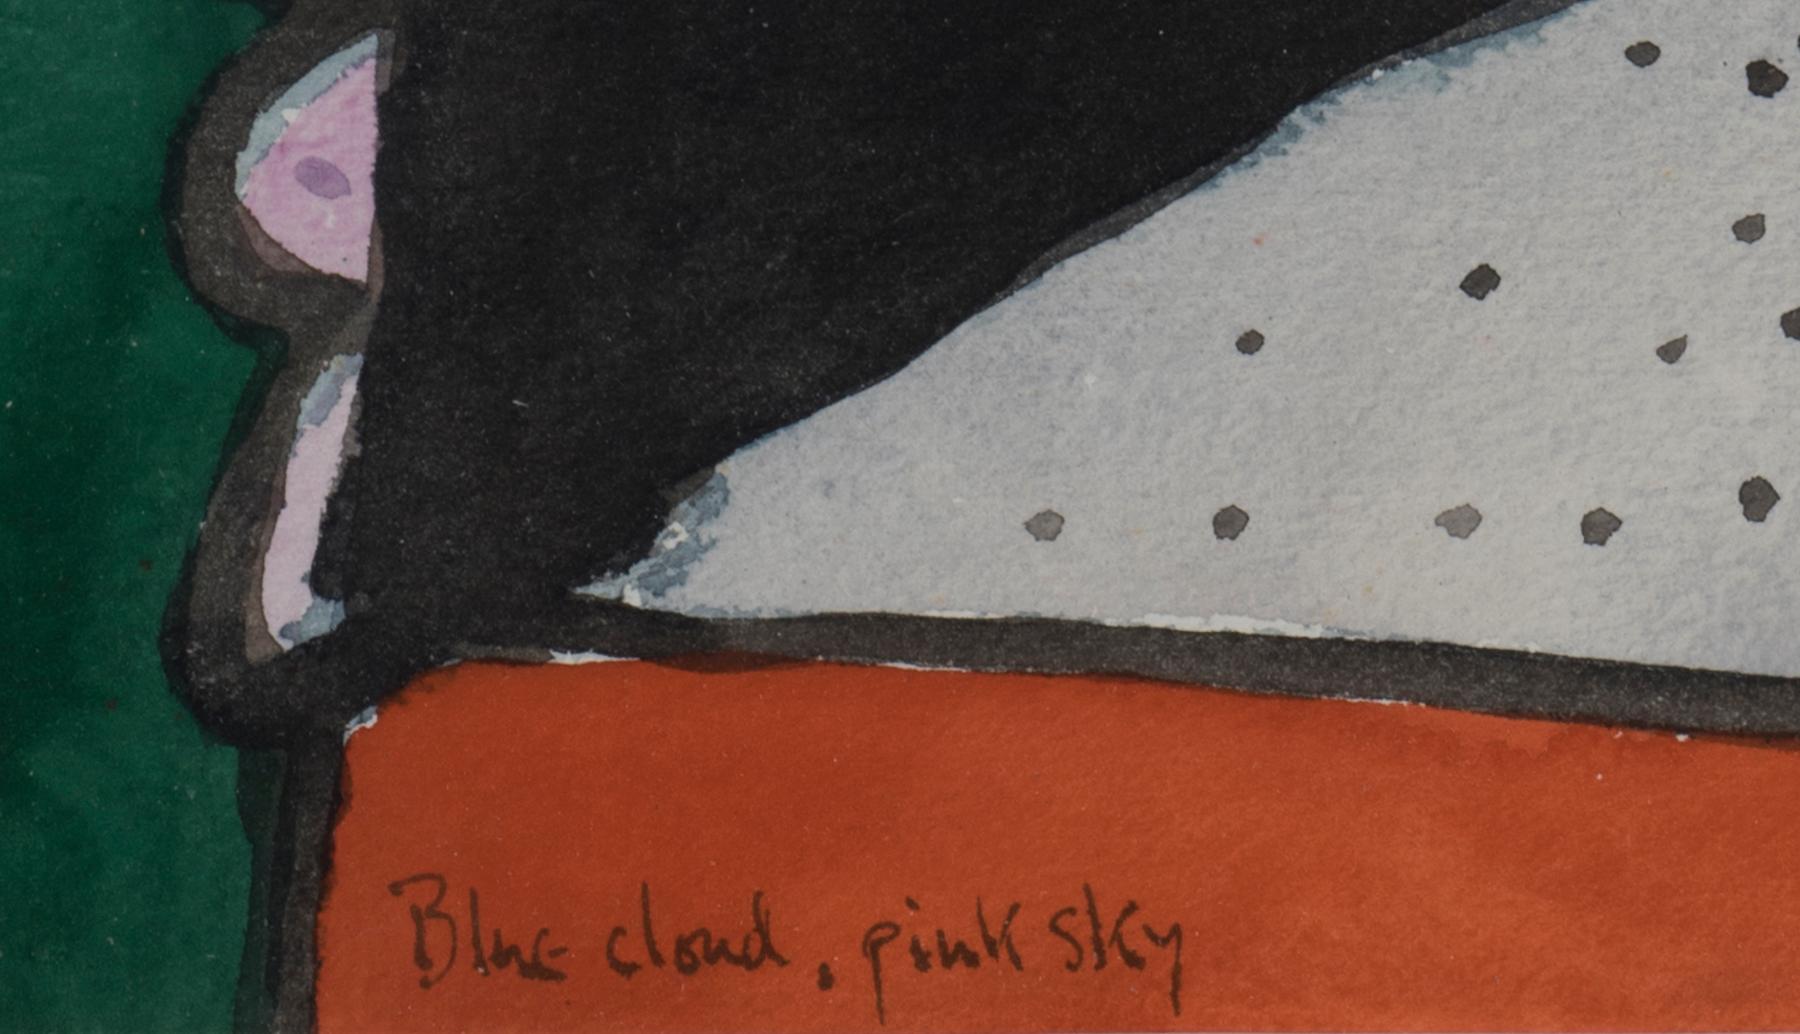 Blue Cloud, Pink Sky is an original artwork realized by the English artist Martin Bradley in 1983. 

Original gouache on paper. 

Titled on the lower left corner Blue Cloud, Pink Sky; hand-signed and dated on the lower right corner 